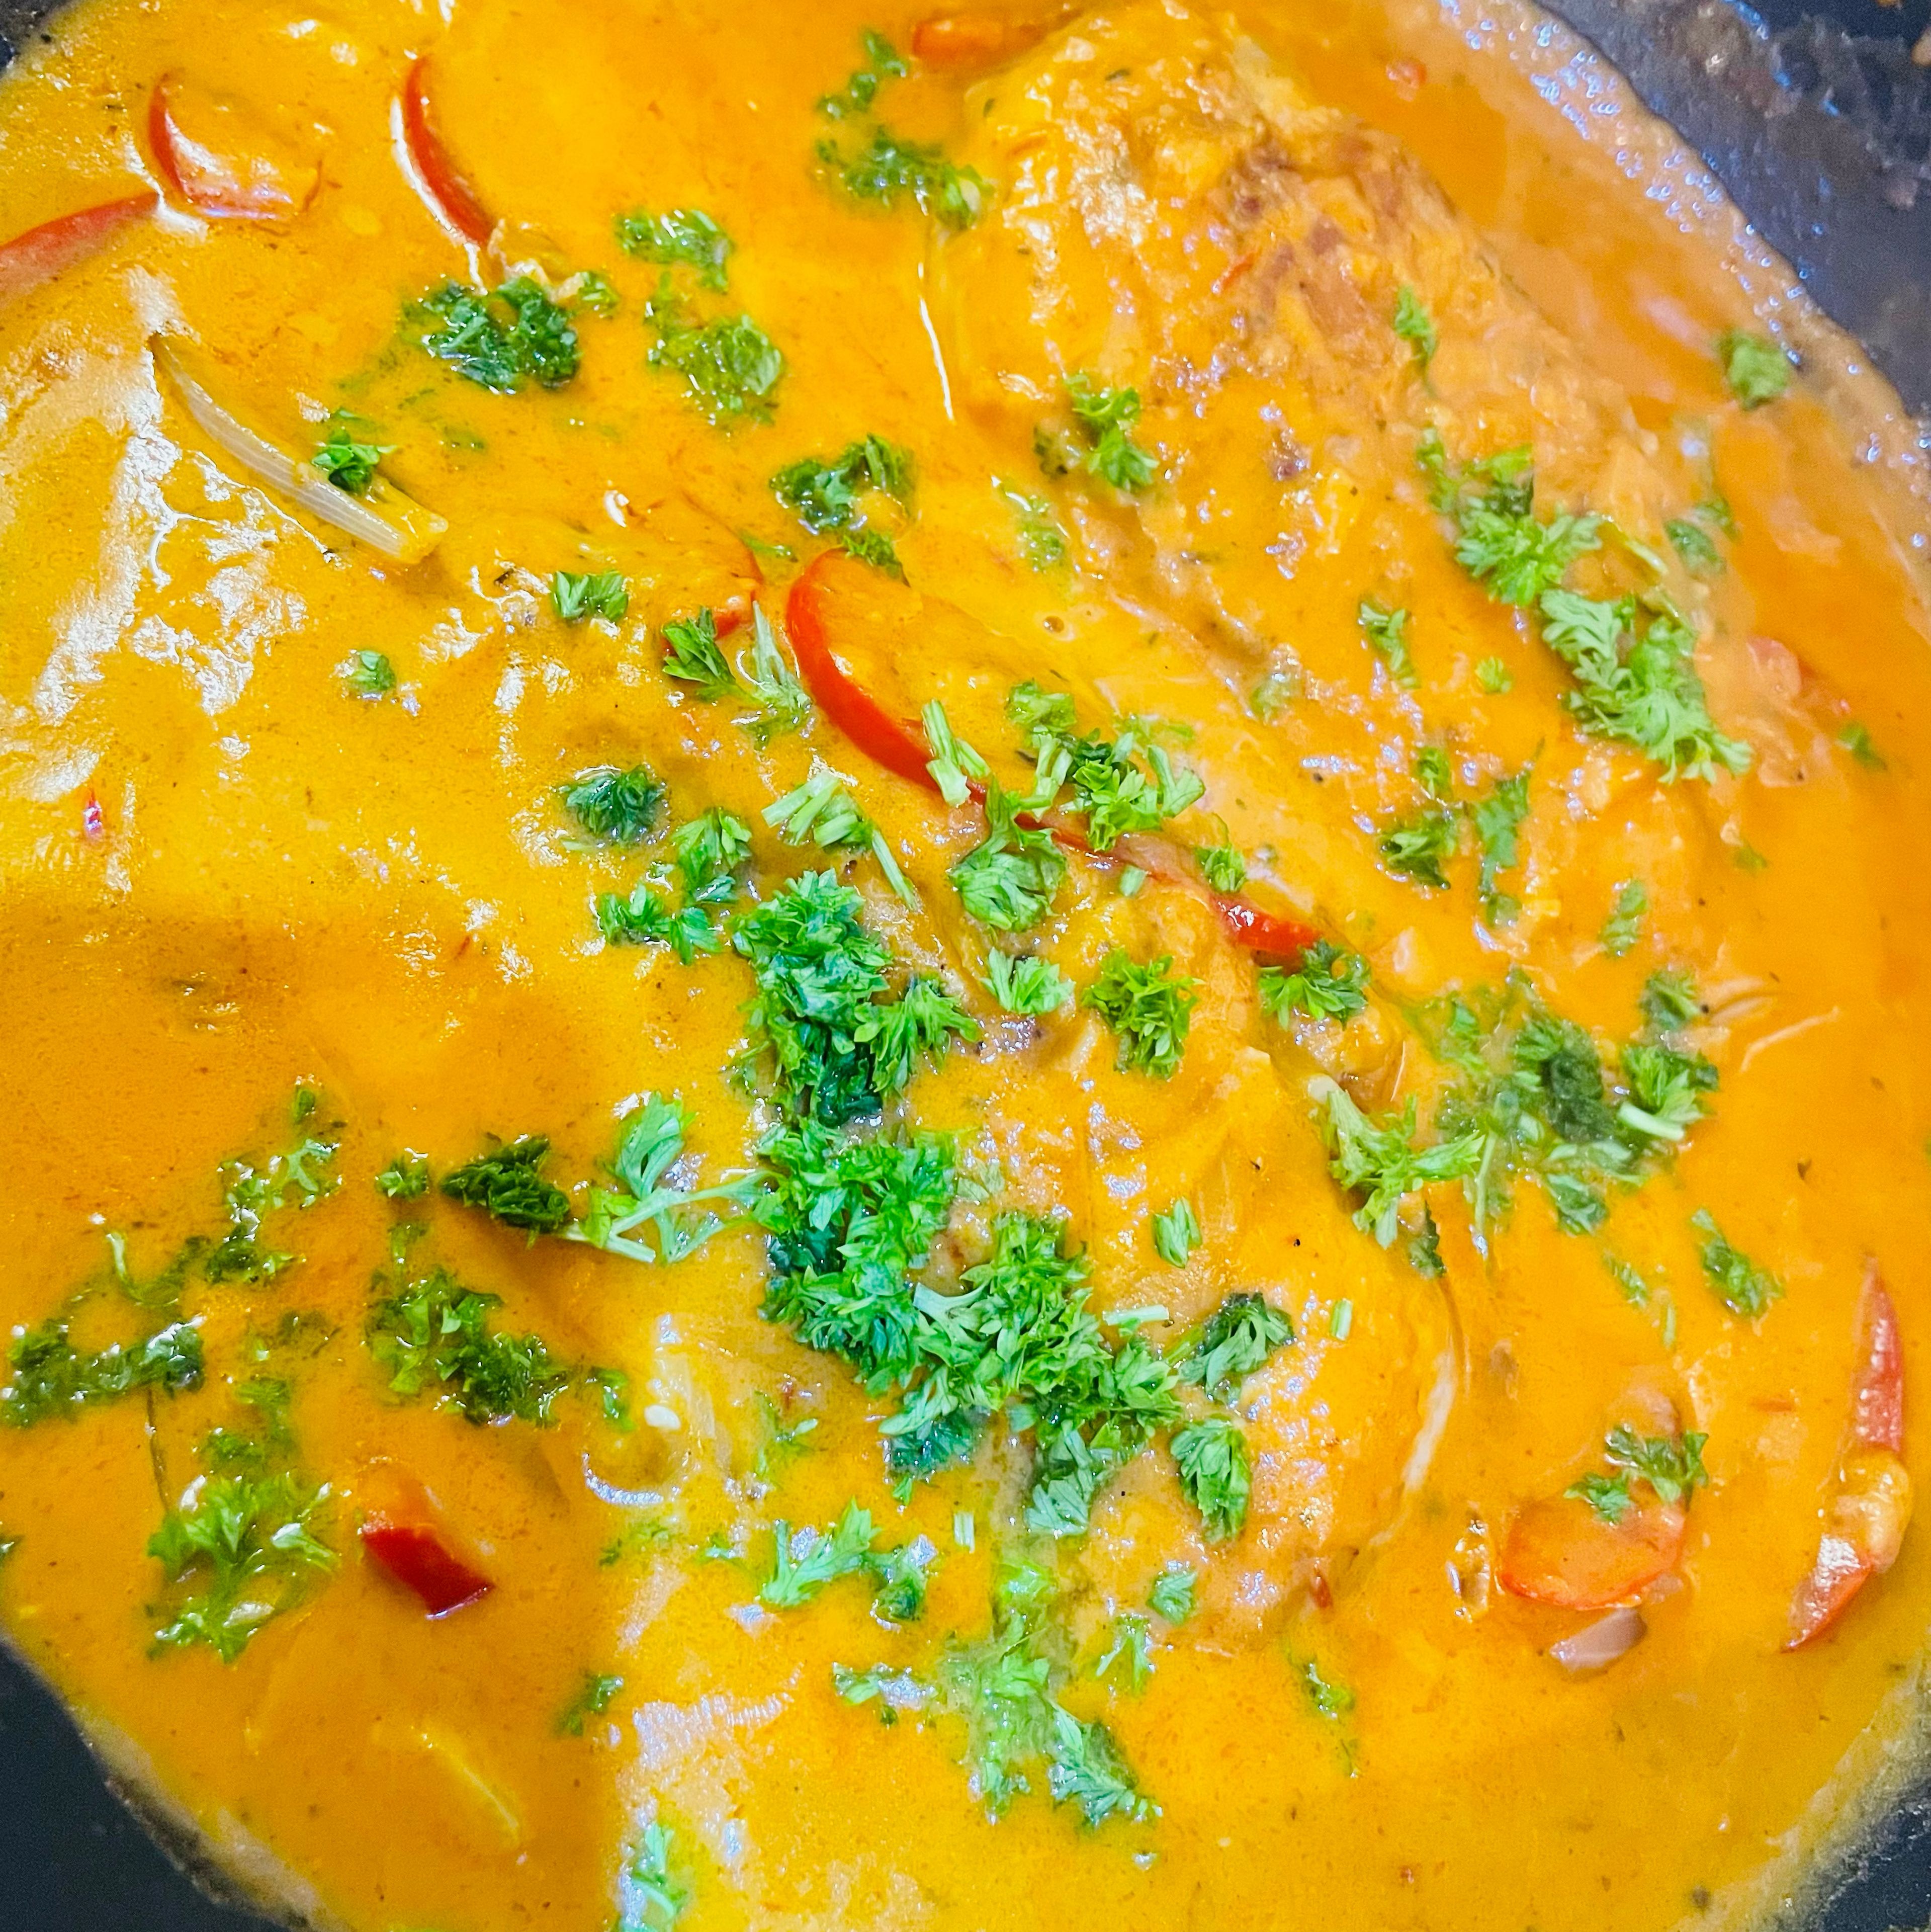 Add chopped parsley and your creamy tomato chicken is ready to eat